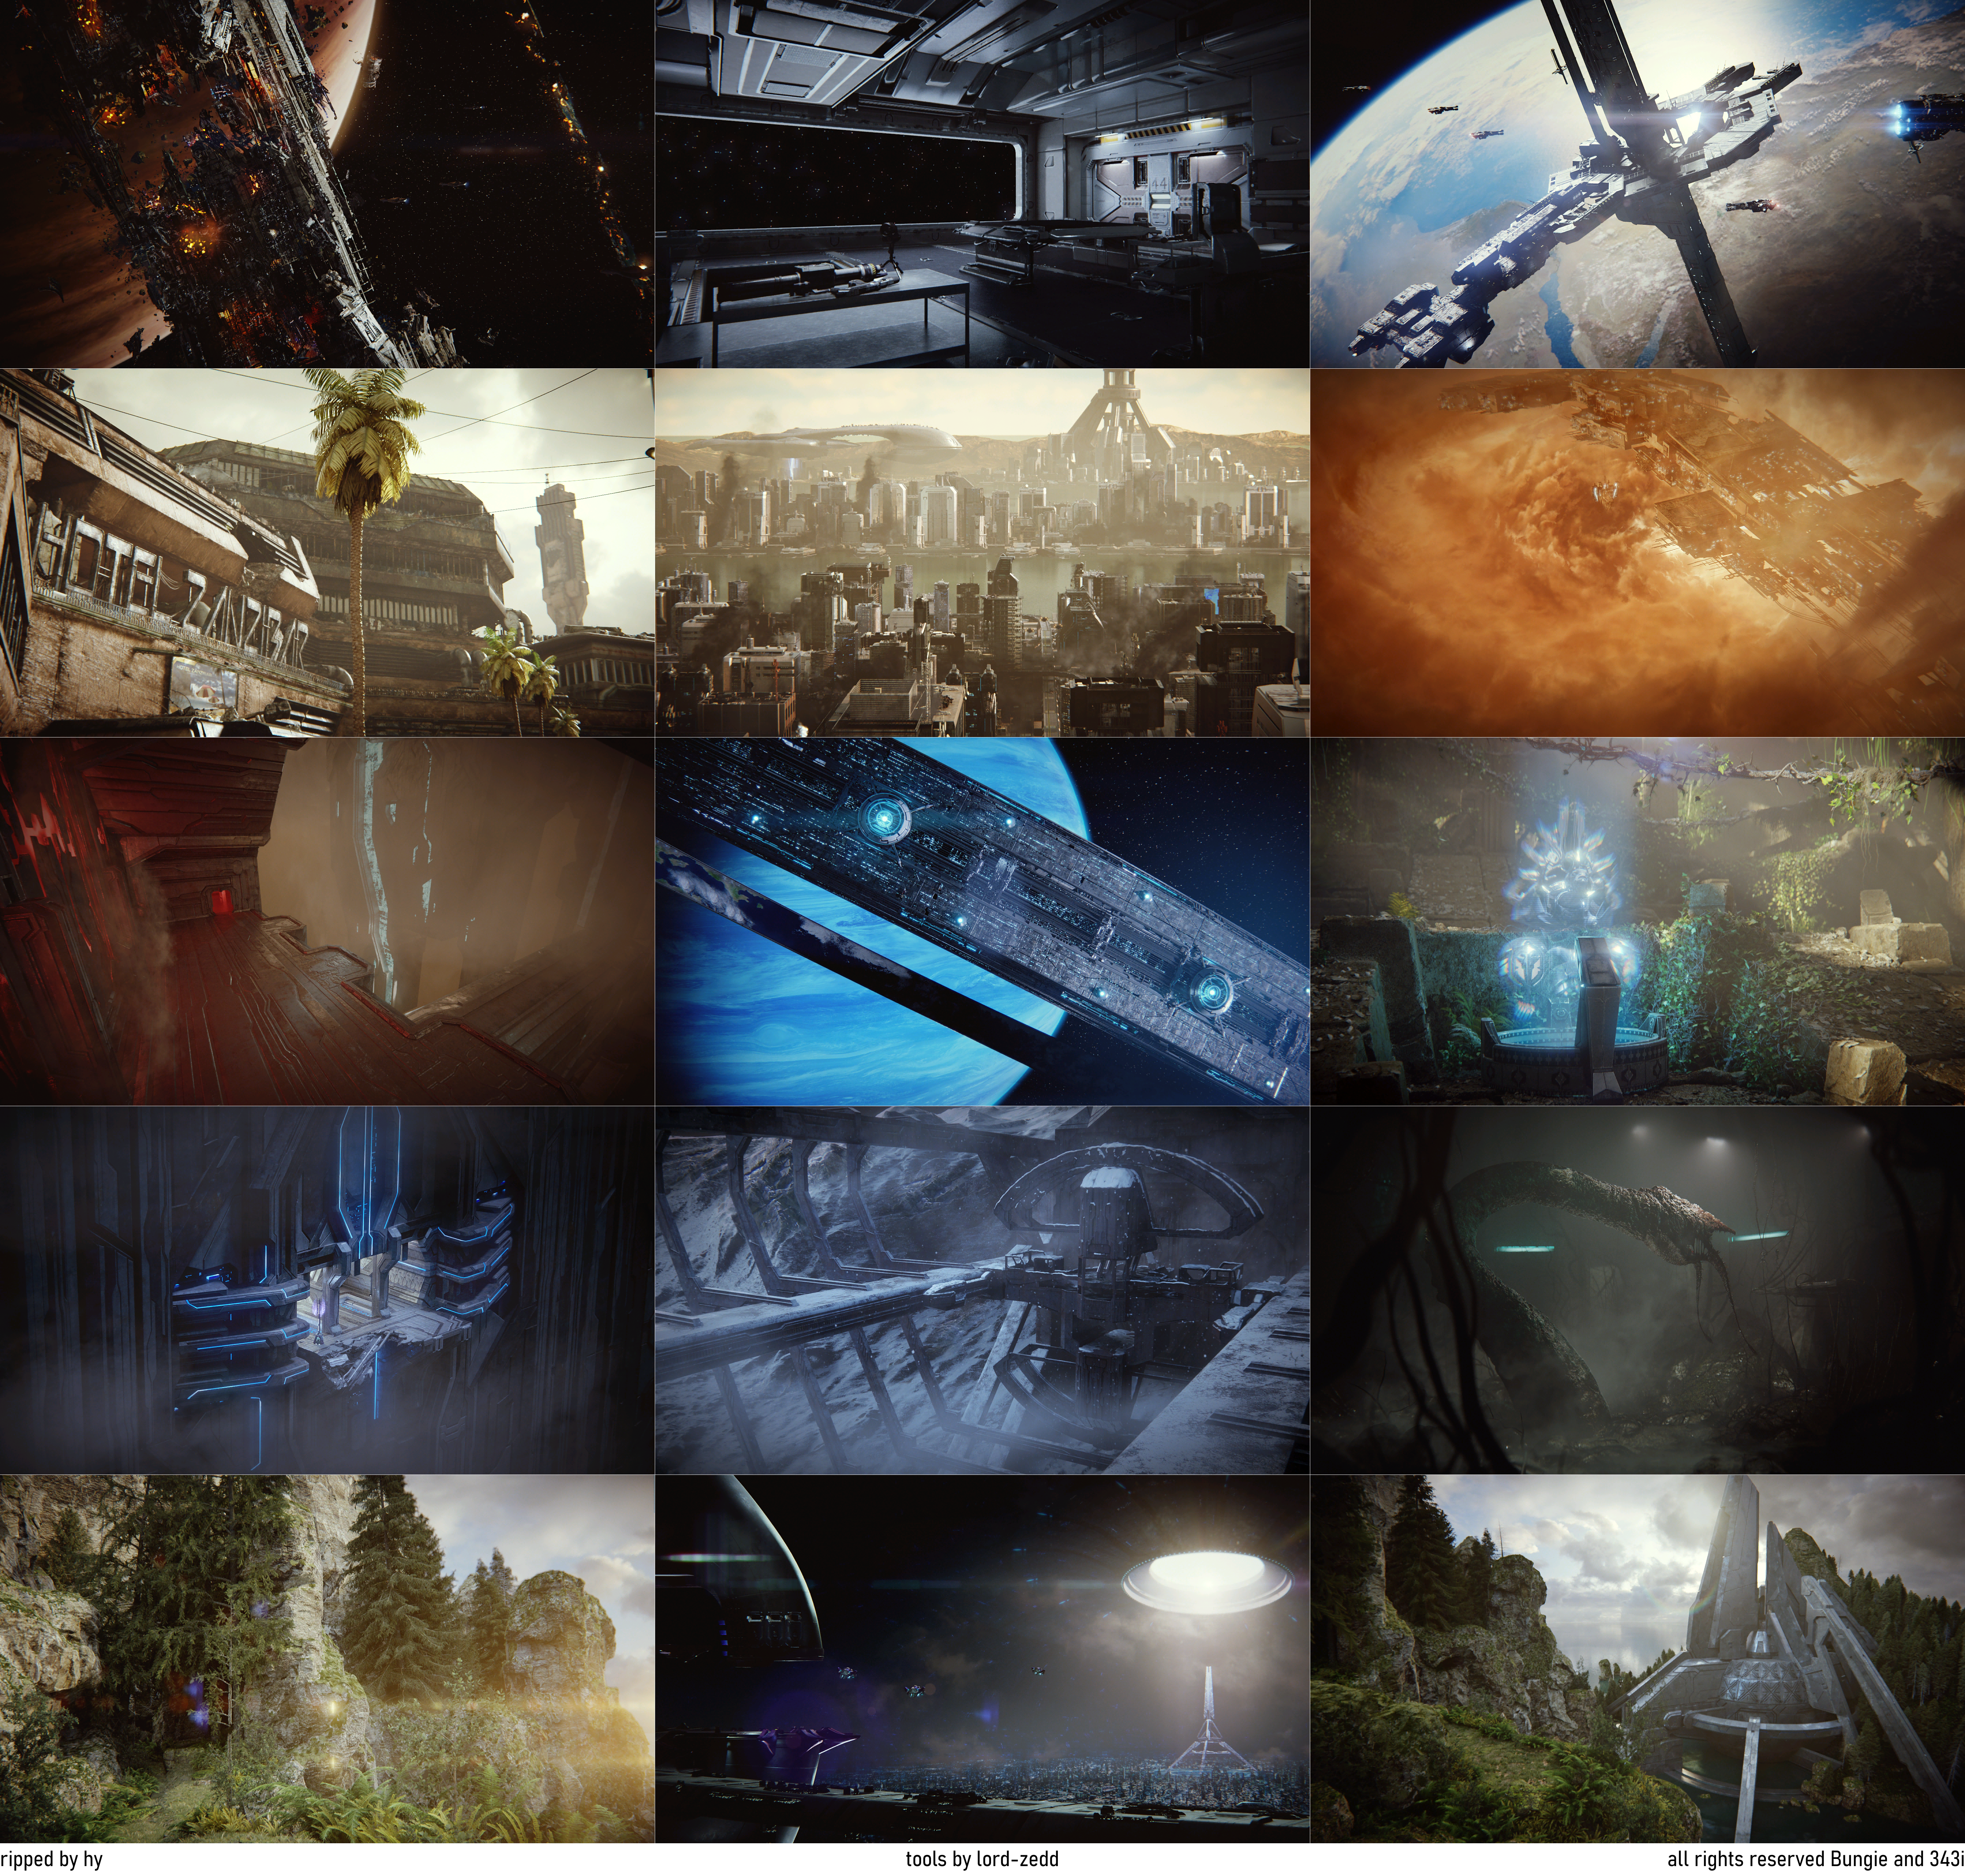 Halo: The Master Chief Collection - Halo 2 Campaign Level Loading Screens